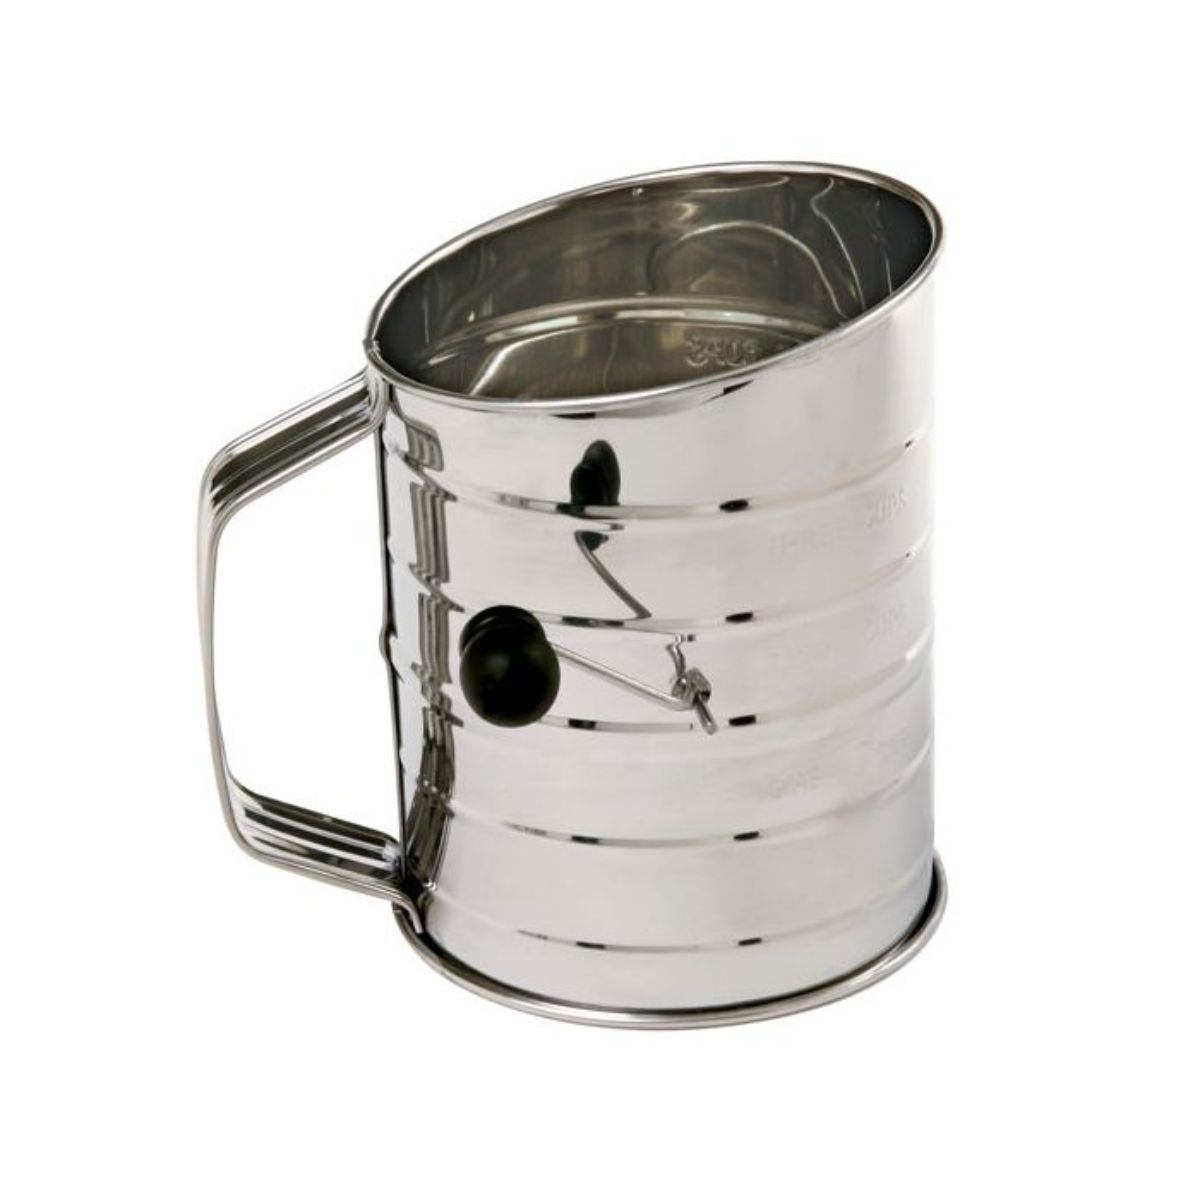 Norpro Stainless Steel Rotary Flour Sifter 3 Cup